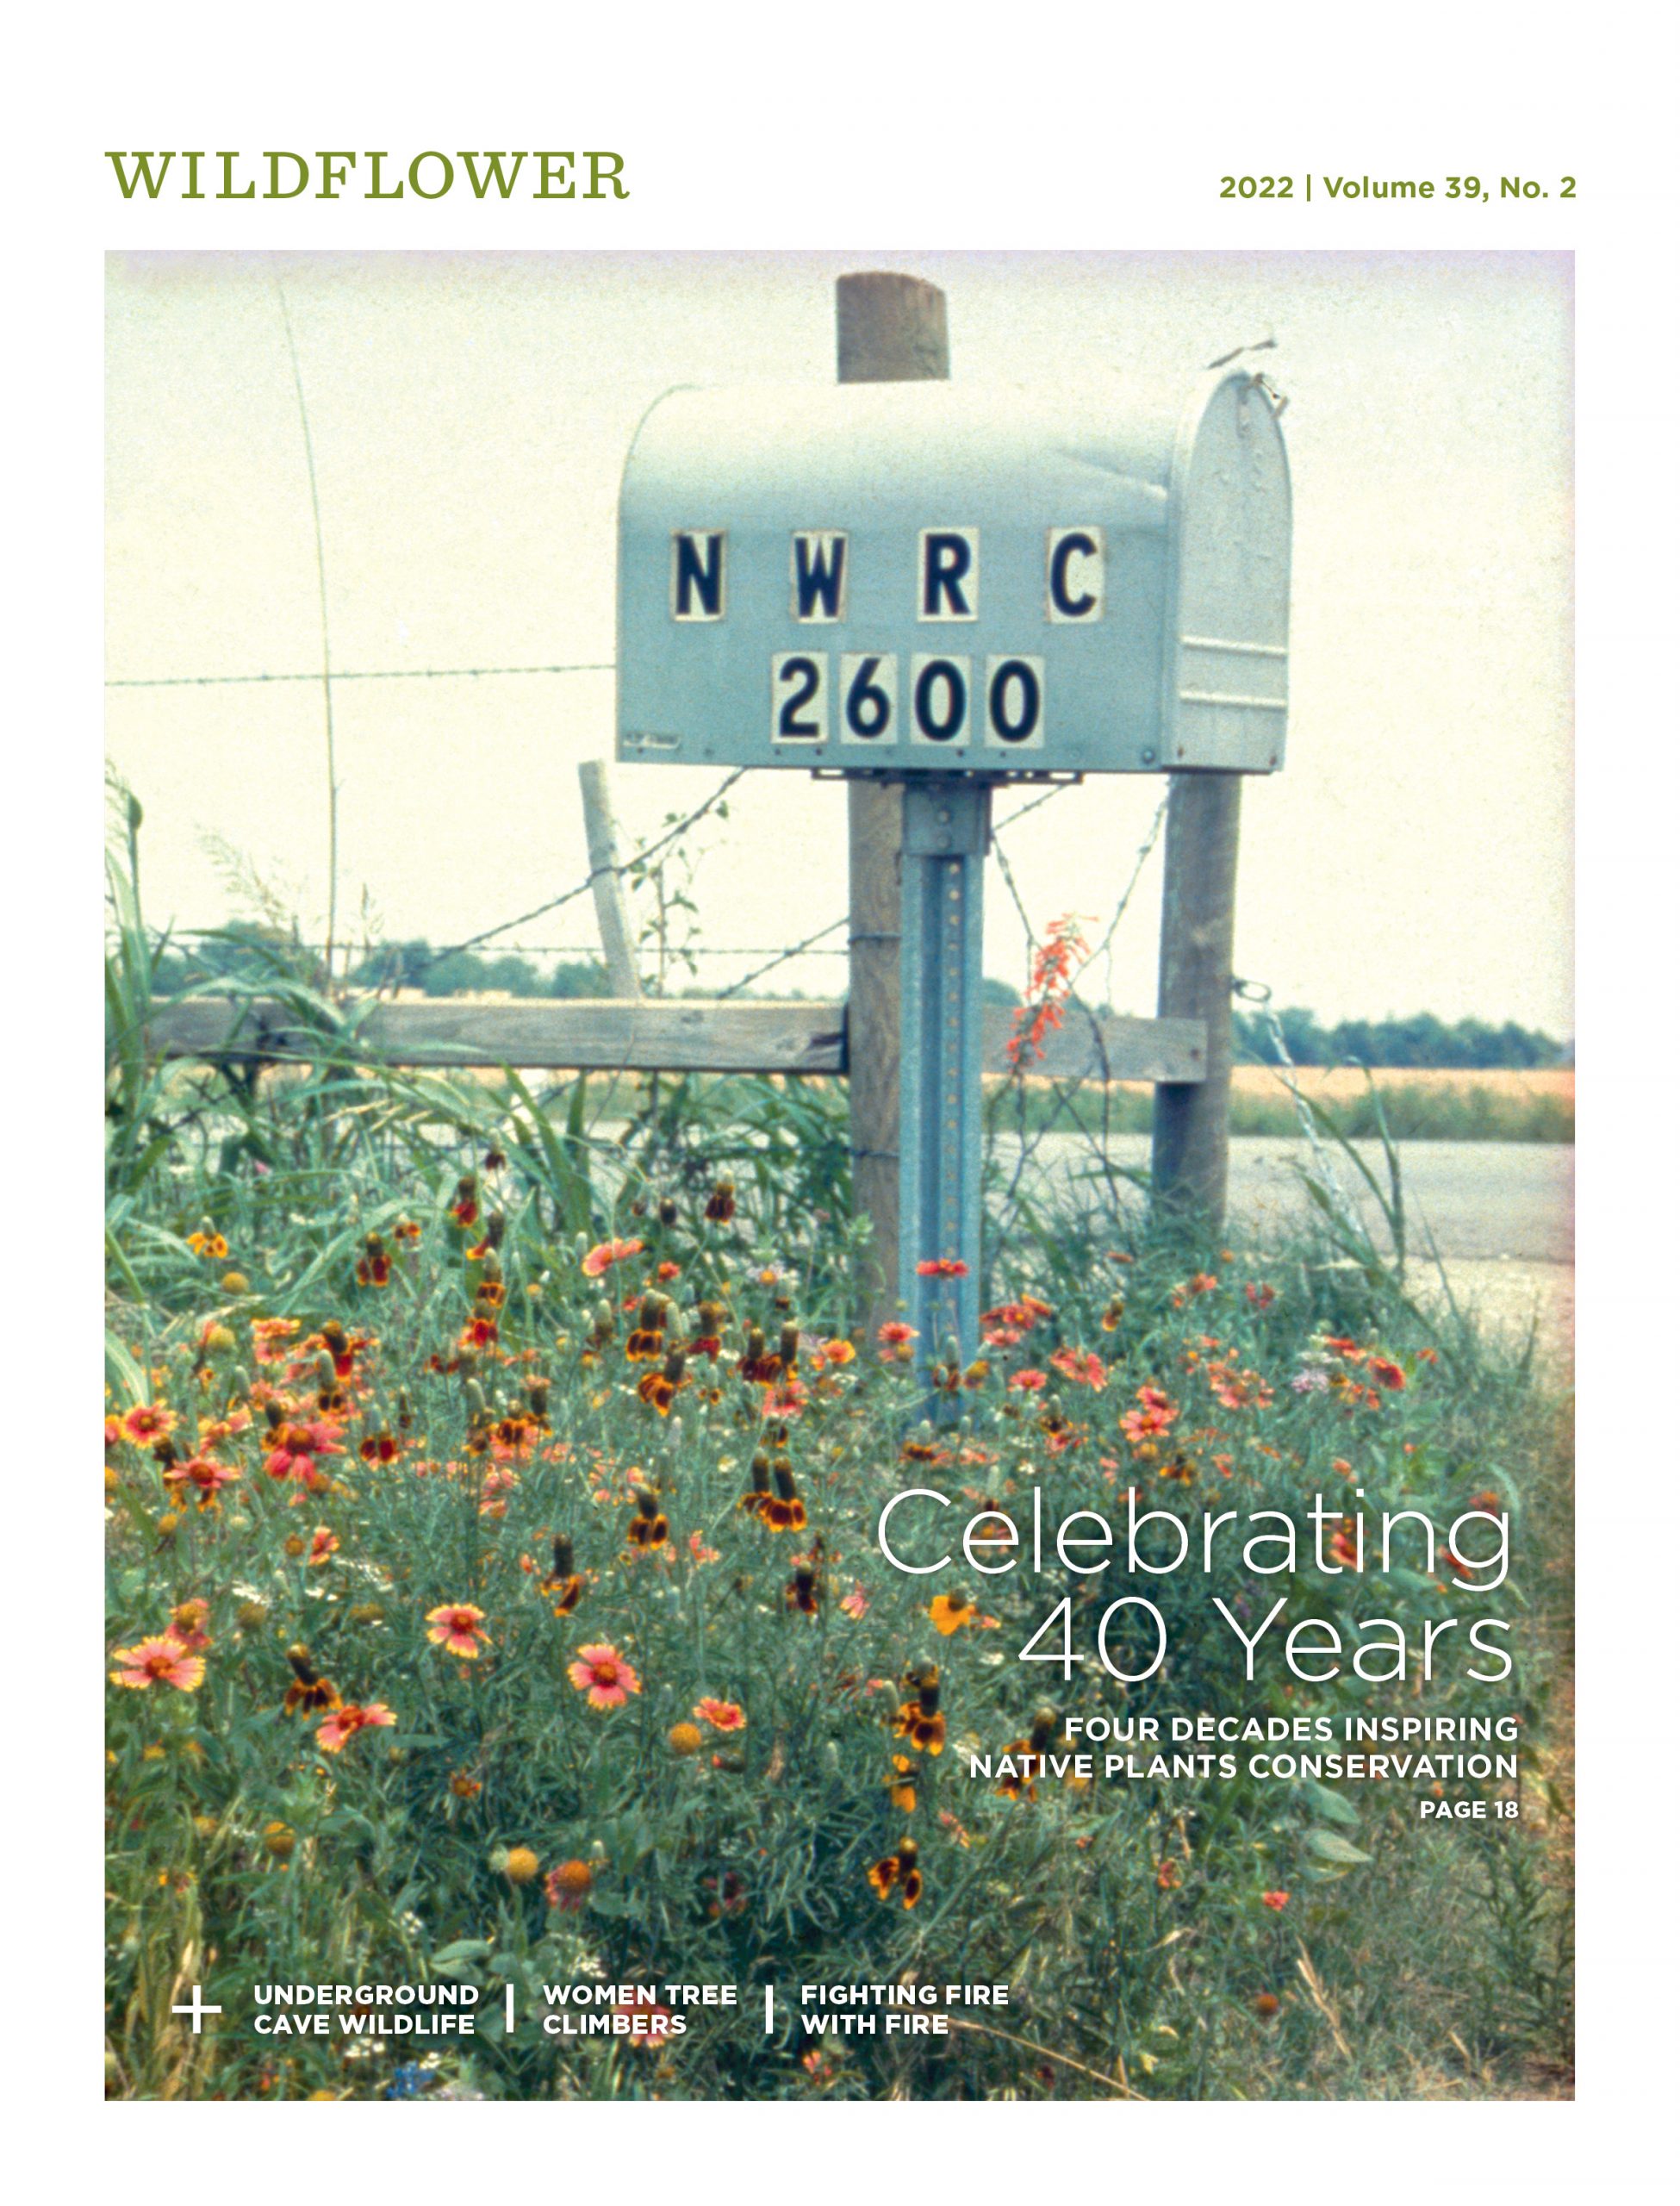 The cover of Wildflower Magazine featuring a vintage photo of our mailbox at our first campus. it has the address NWRC 2600 on it and is surrounded by wildflowers.